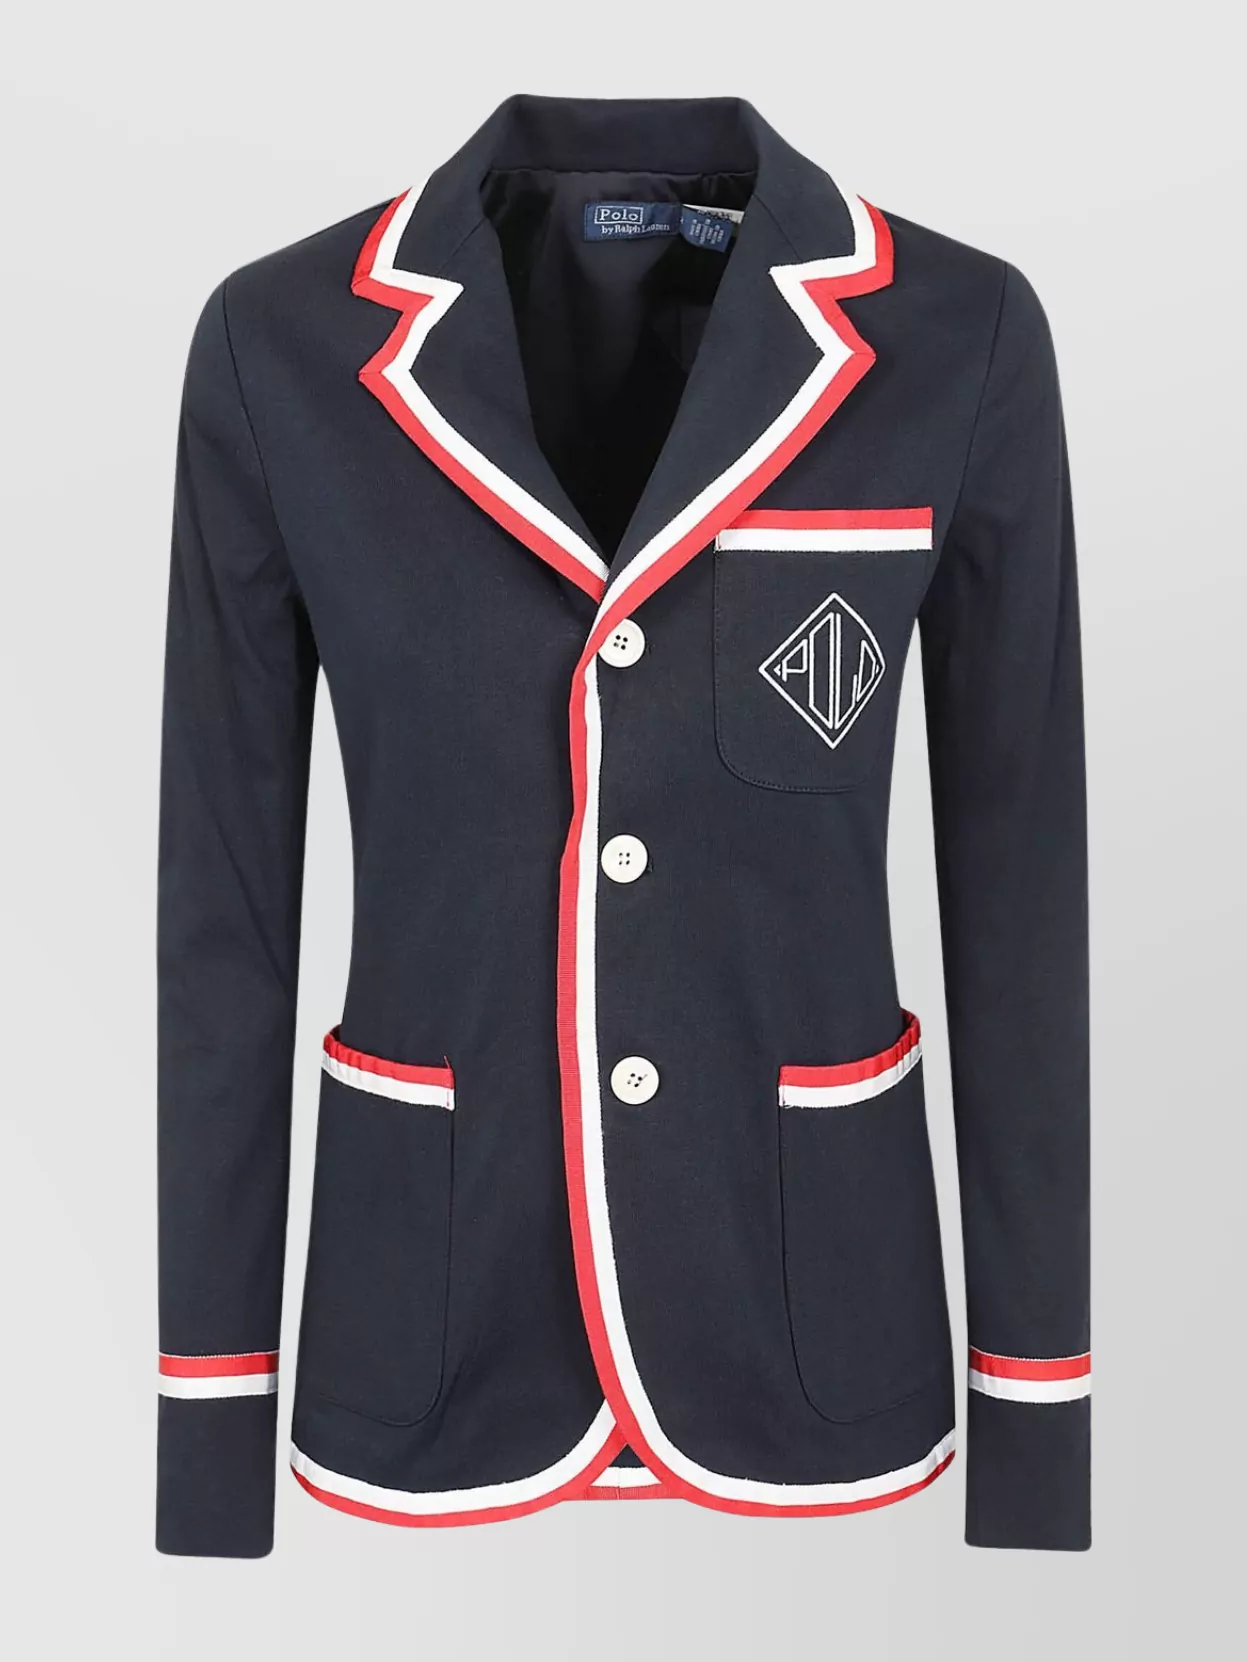 POLO RALPH LAUREN CRICKET BLAZER WITH NOTCH LAPEL AND CONTRAST PIPING